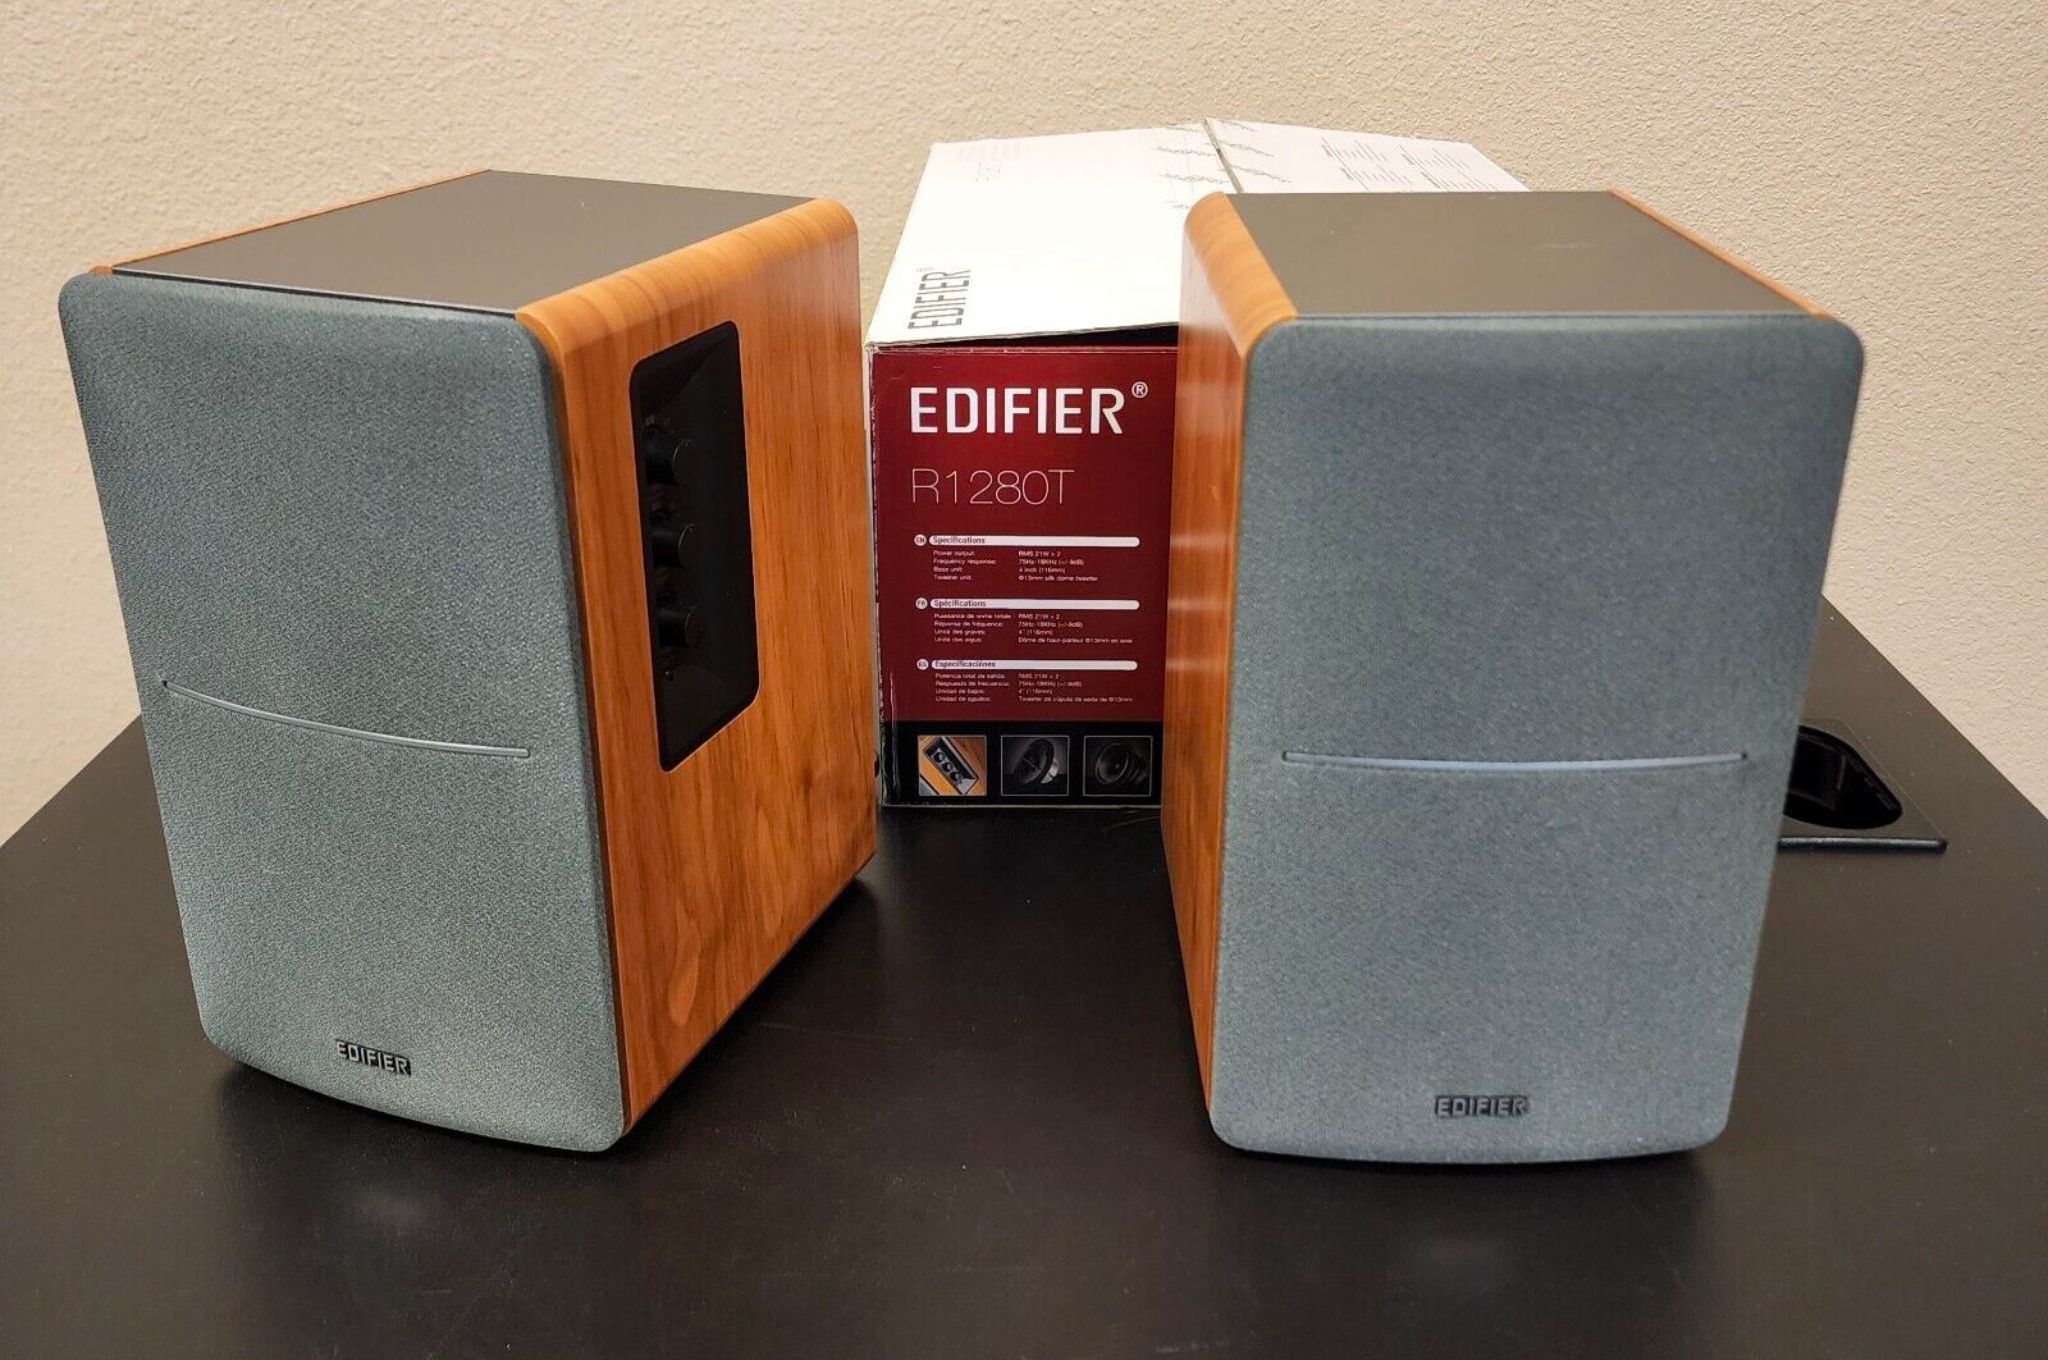 Edifier R1280T speakers in front of box